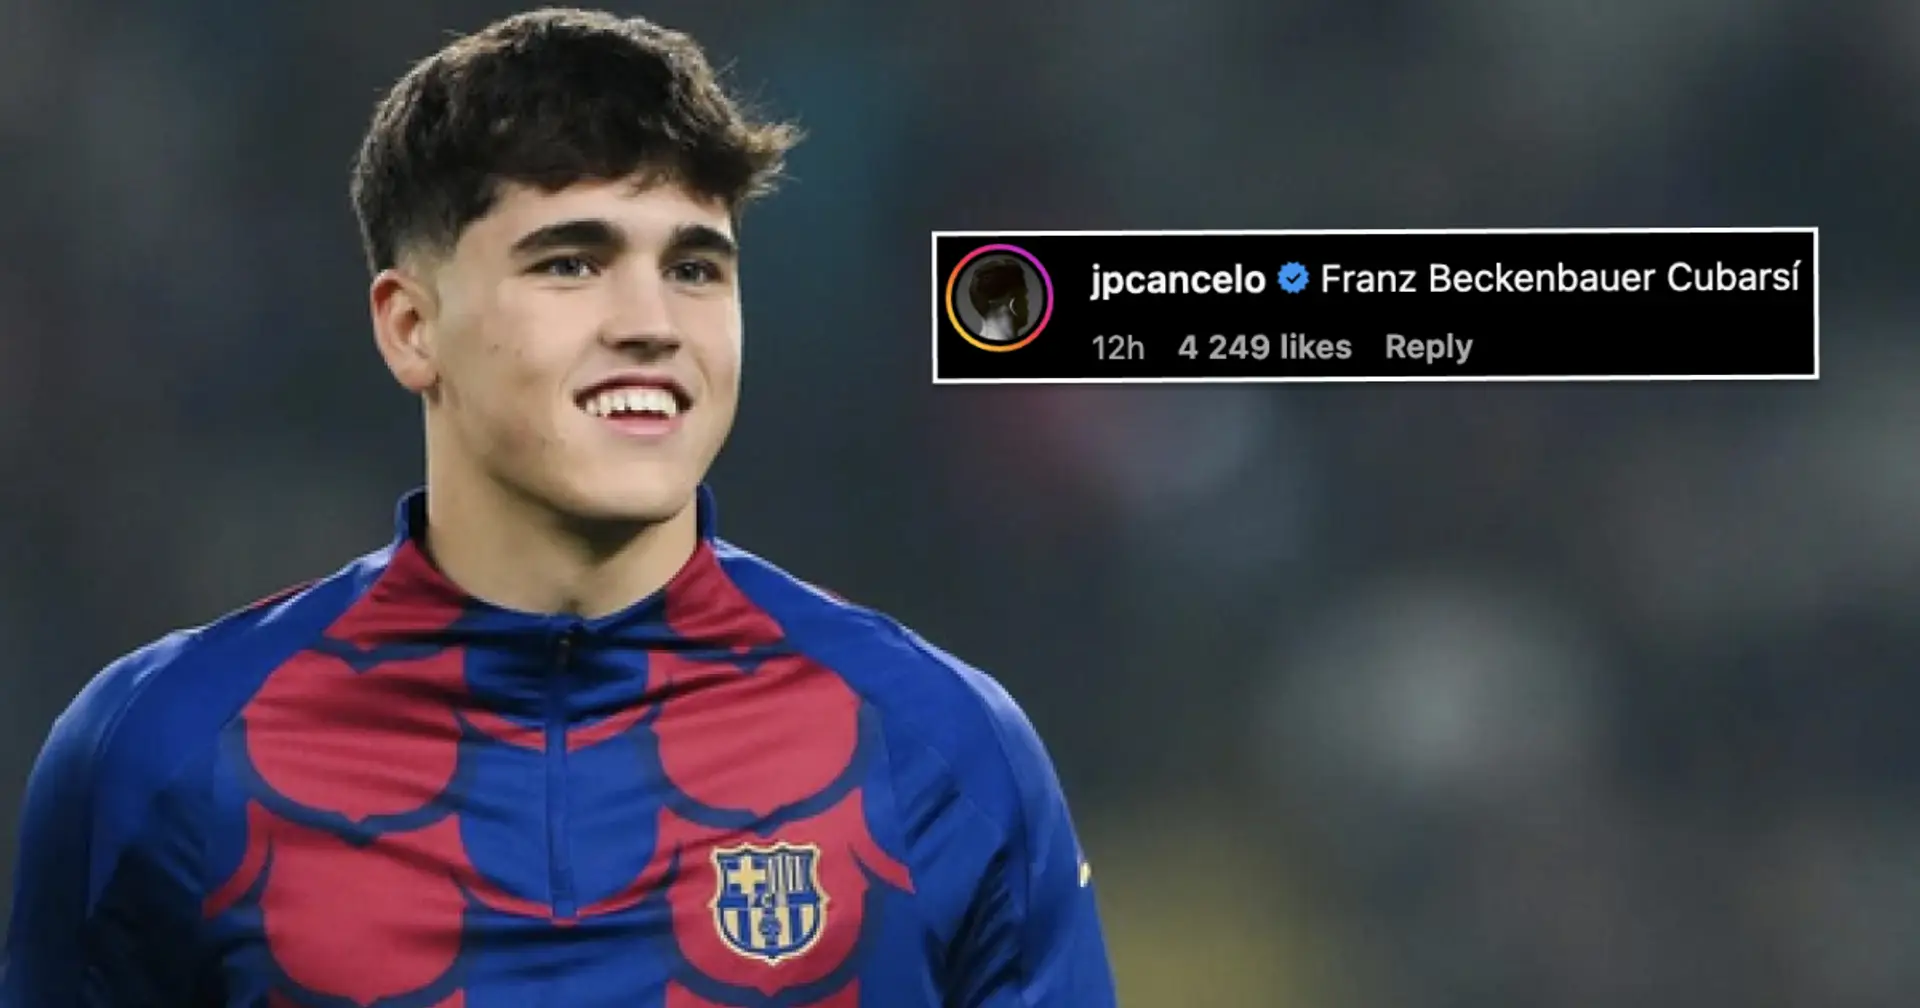 'Beckenbauer', 'you're so handsome': Barca players' comments for Cubarsi go viral